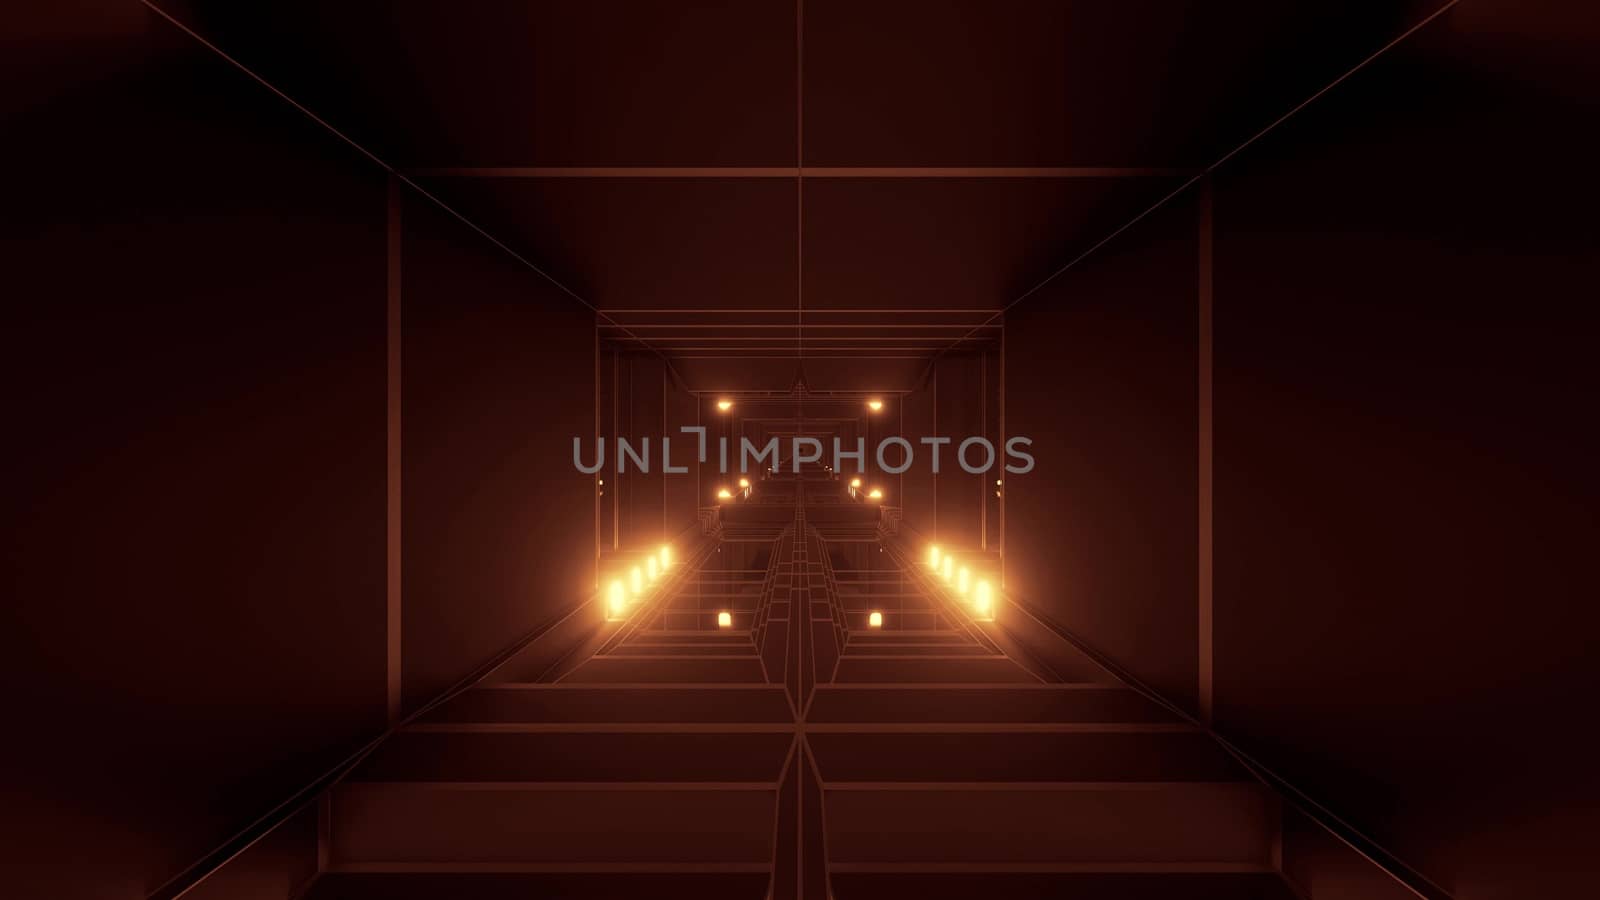 dark atmospheric science-fiction tunnel corridor with glowing lights and reflective glass windows 3d illustration background wallpaper graphic artwork by tunnelmotions